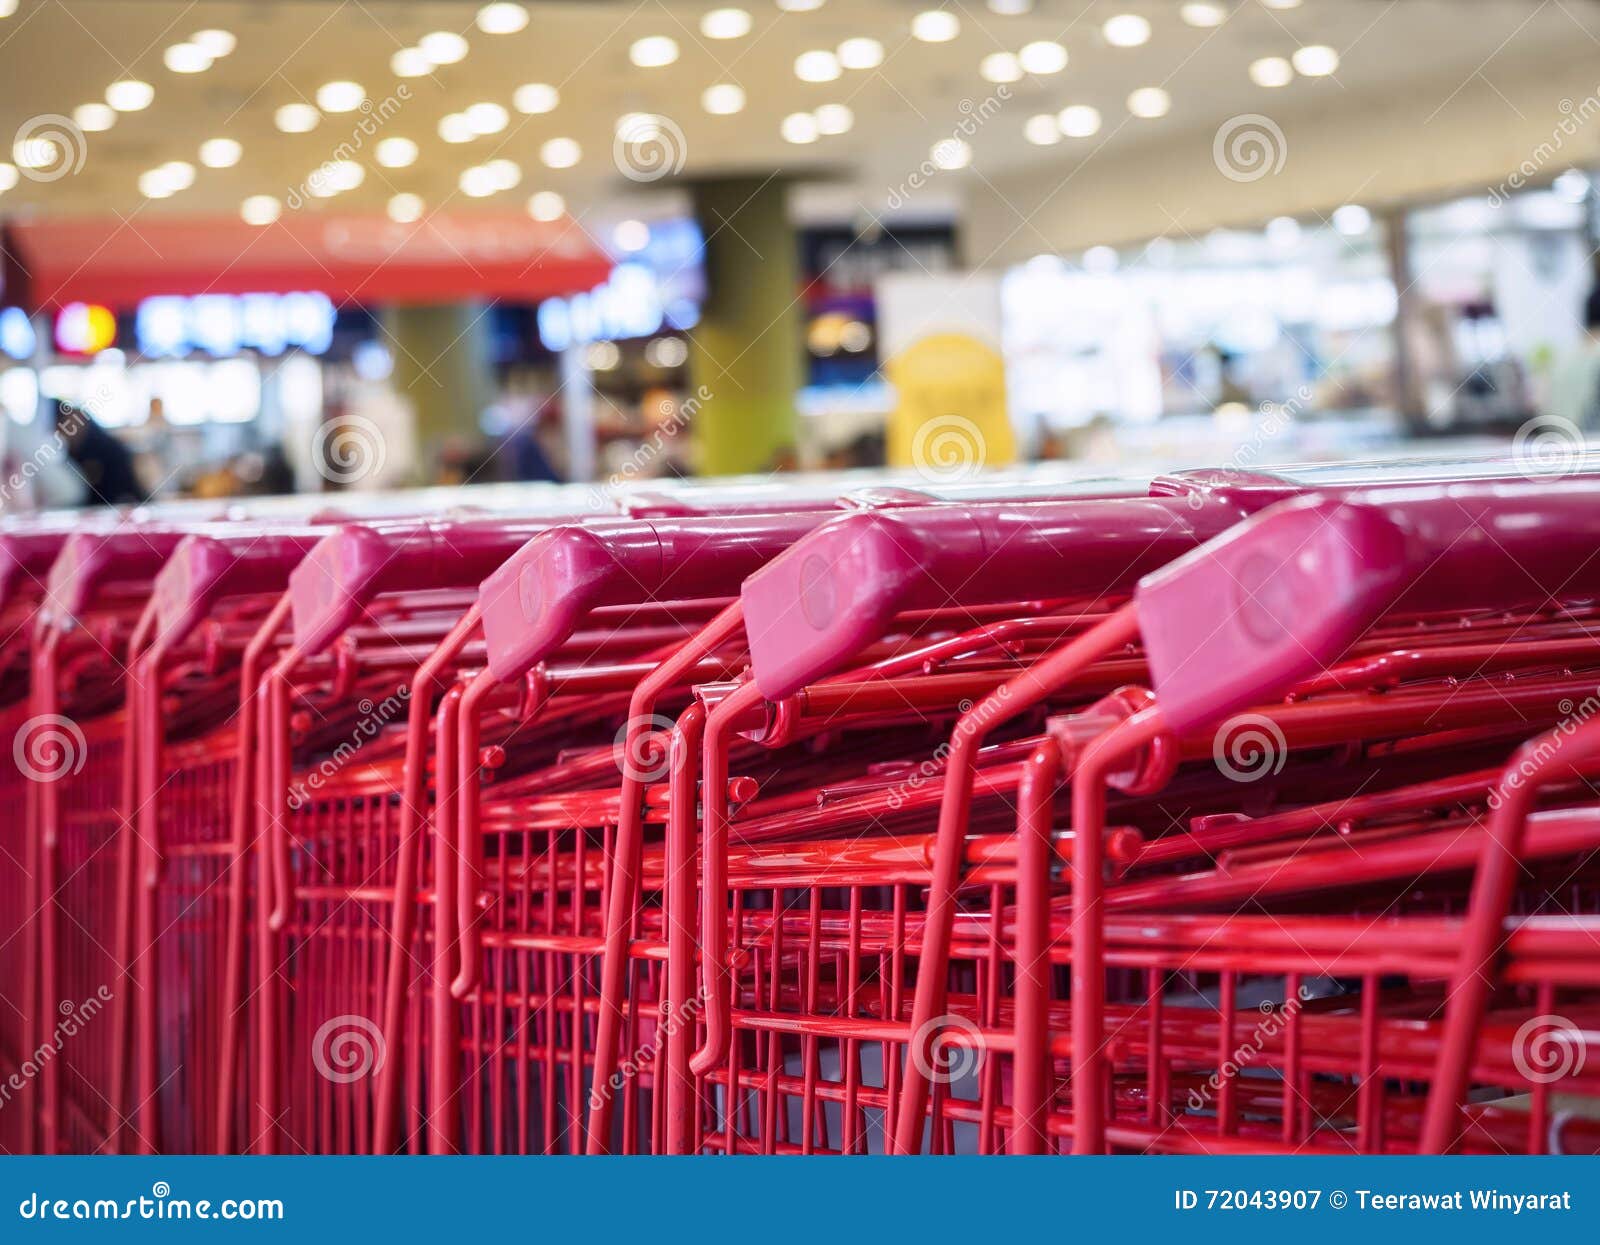 supermarket trolley consumer shopping retail business concept